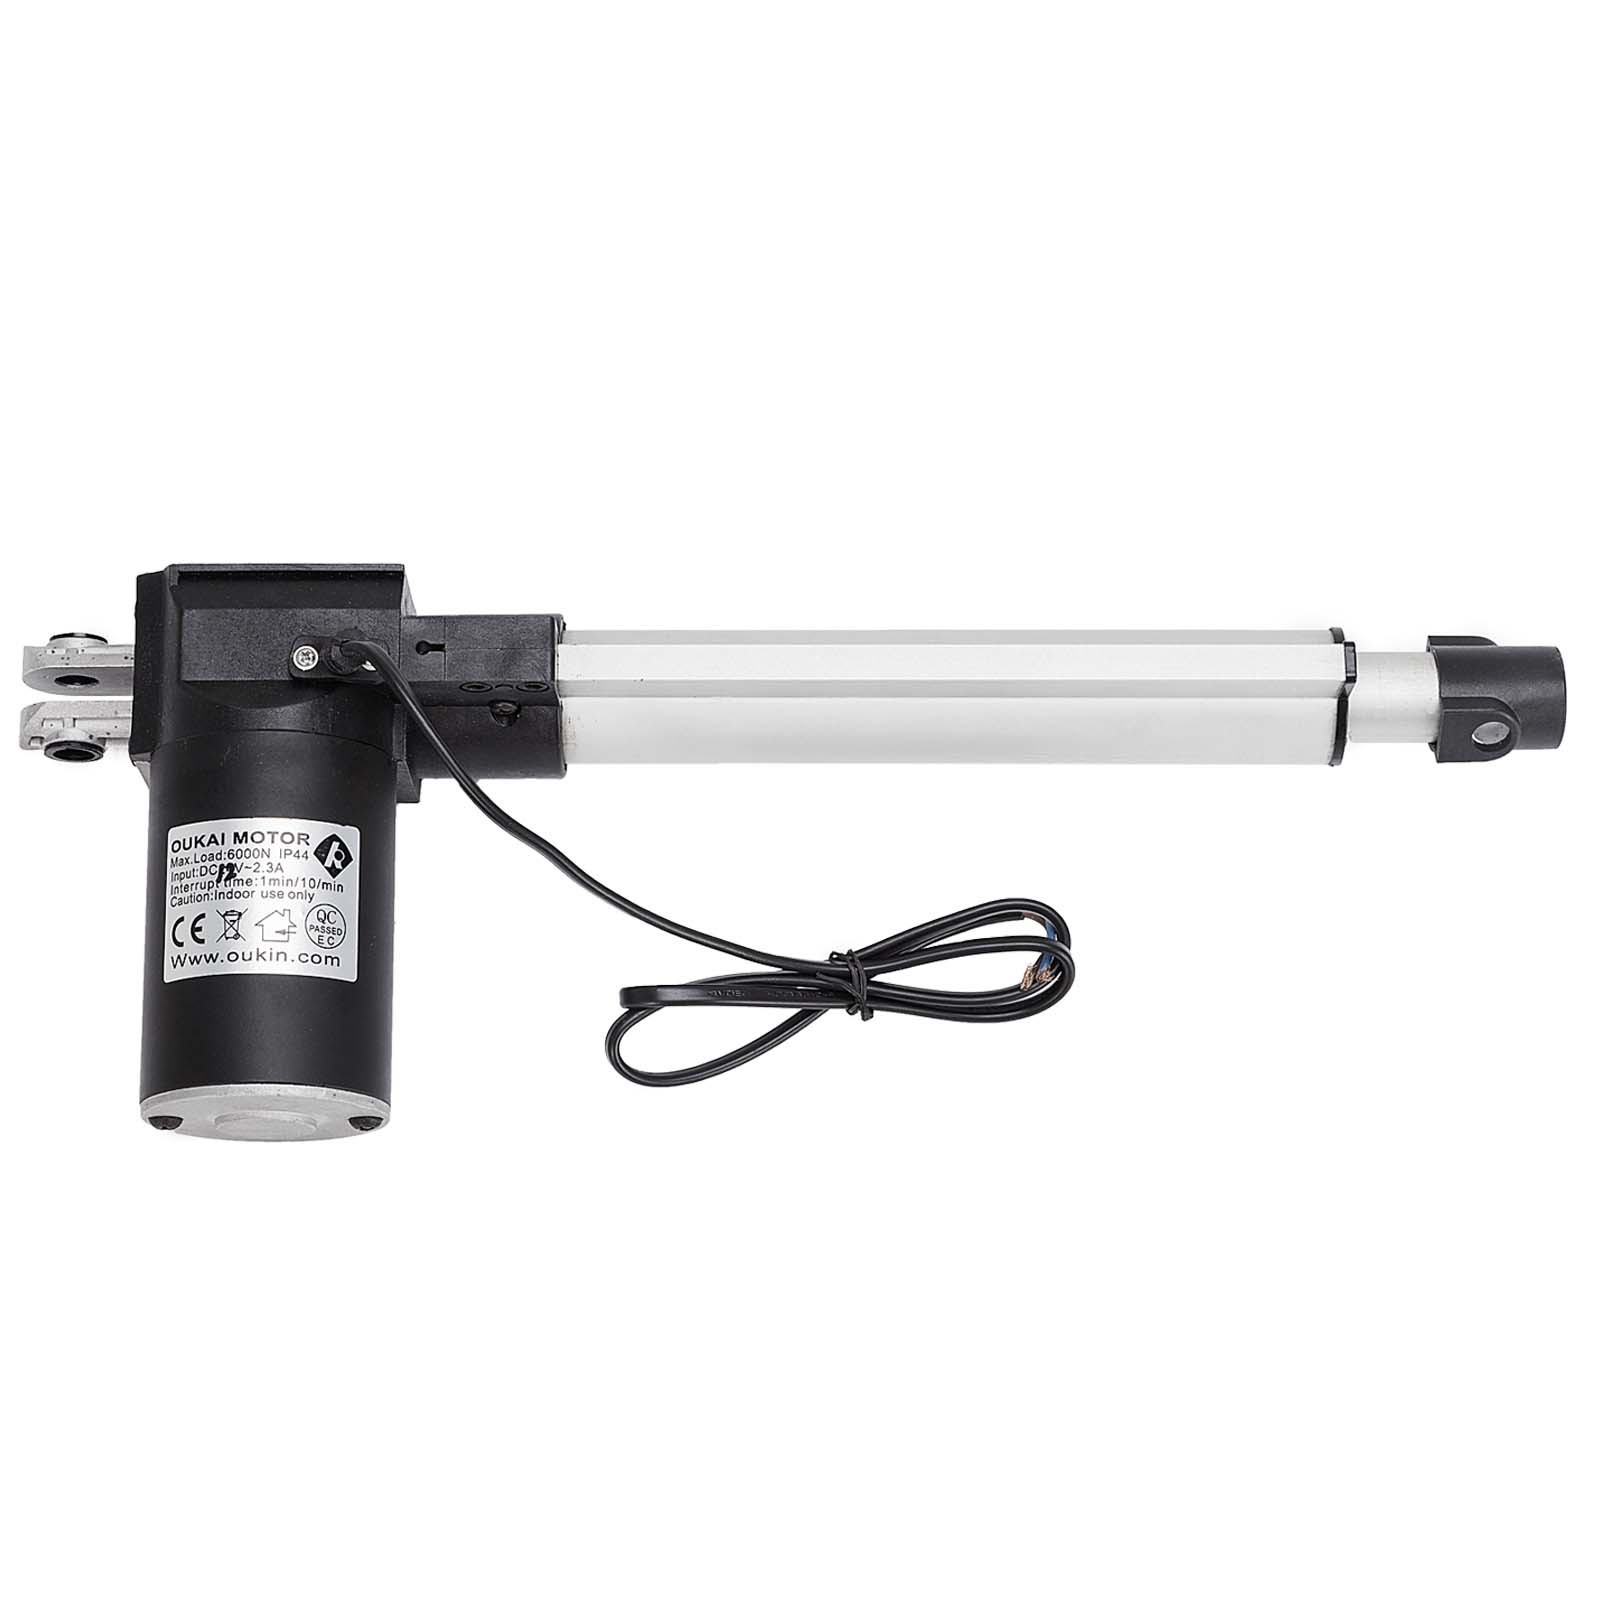 12" 6000N Electric Linear Actuator 1320 Pound Max Lift Heavy Duty 12V DC Motor 